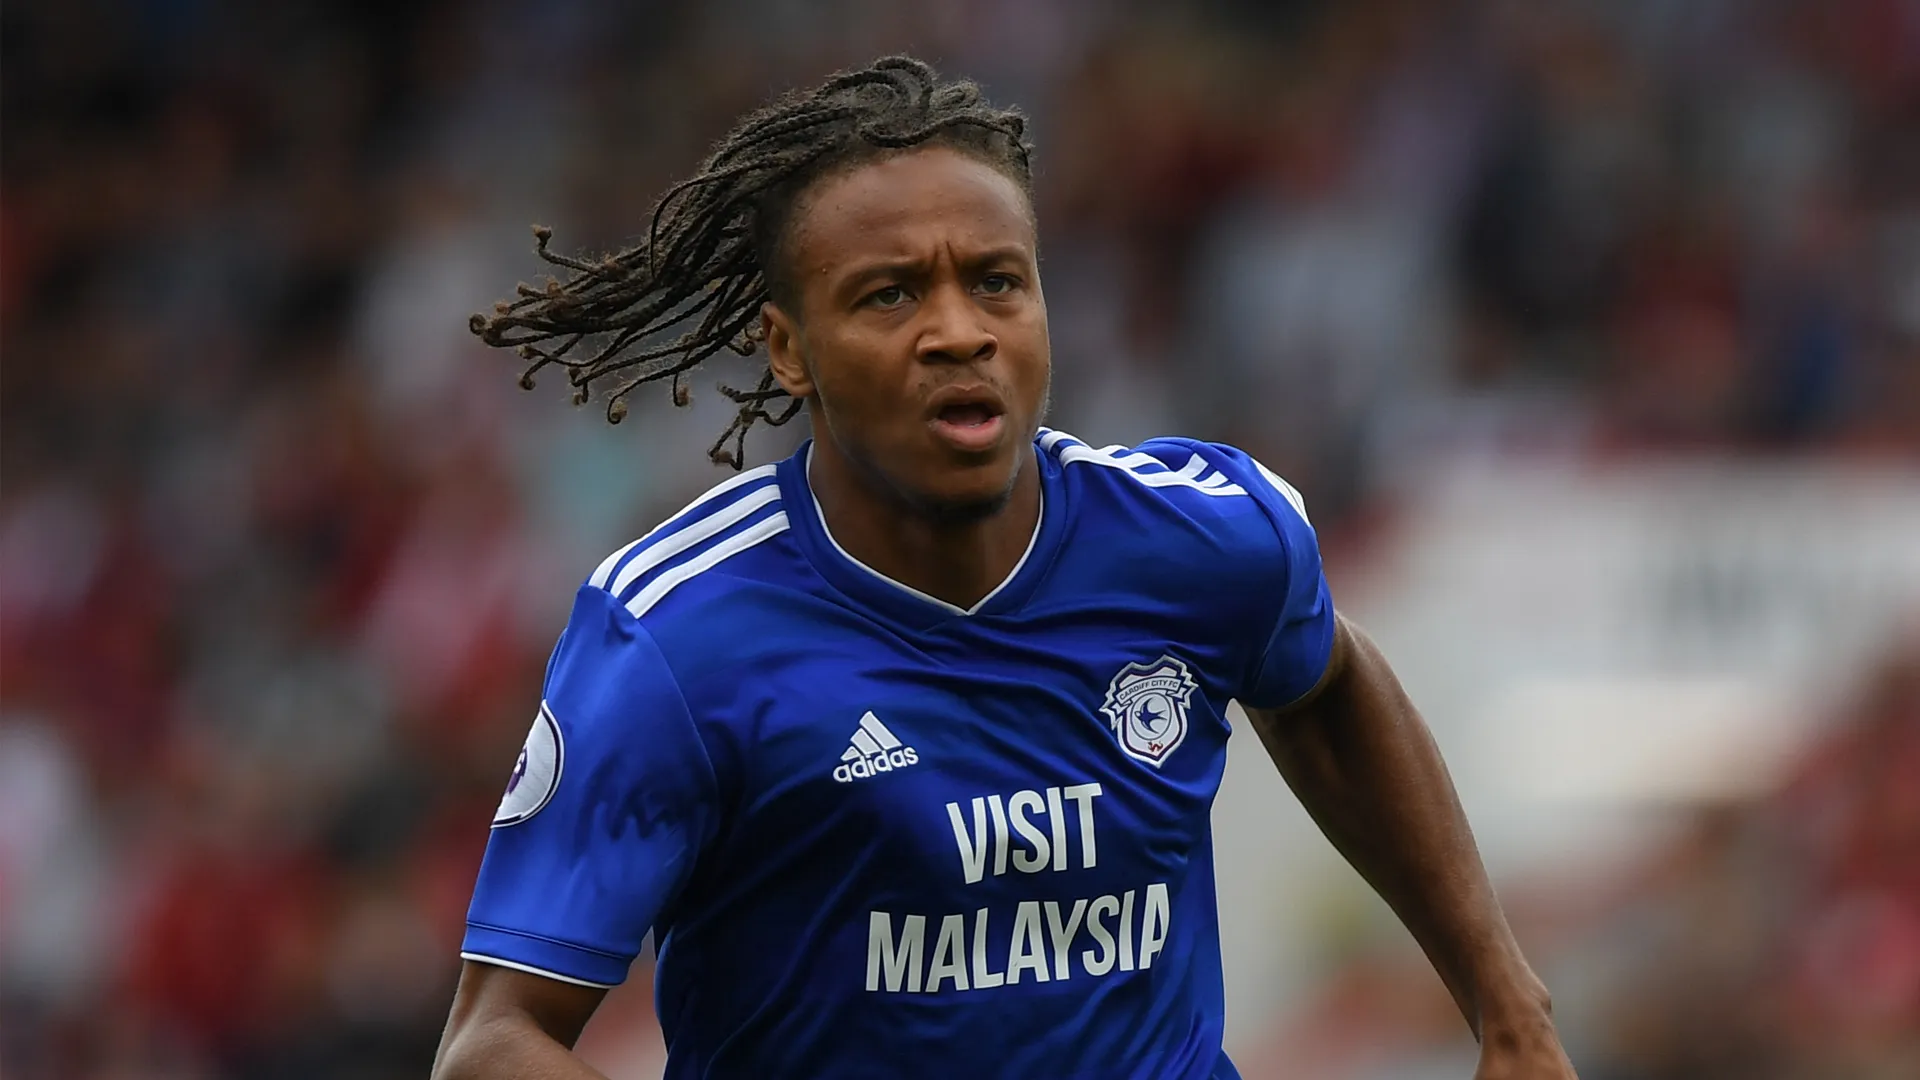 Cardiff City Squad 2019 : Cardiff City FC first team all players